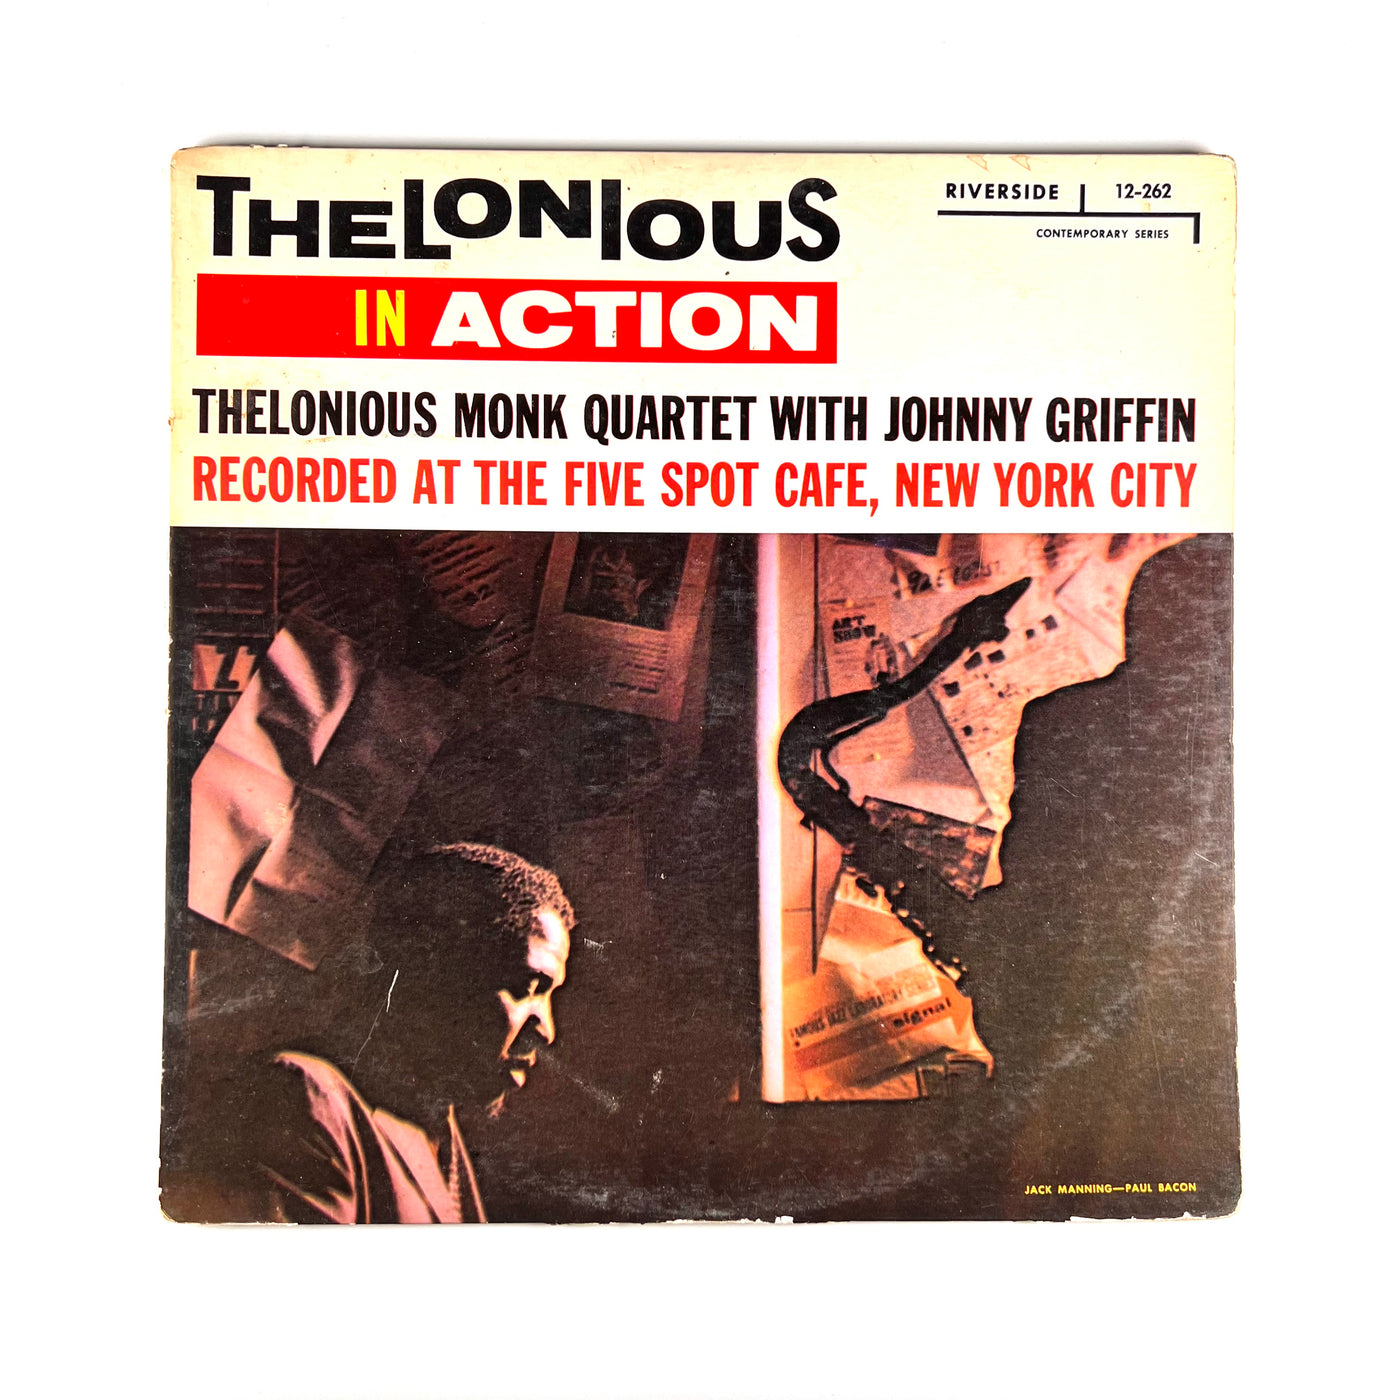 The Thelonious Monk Quartet With Johnny Griffin - Thelonious In Action